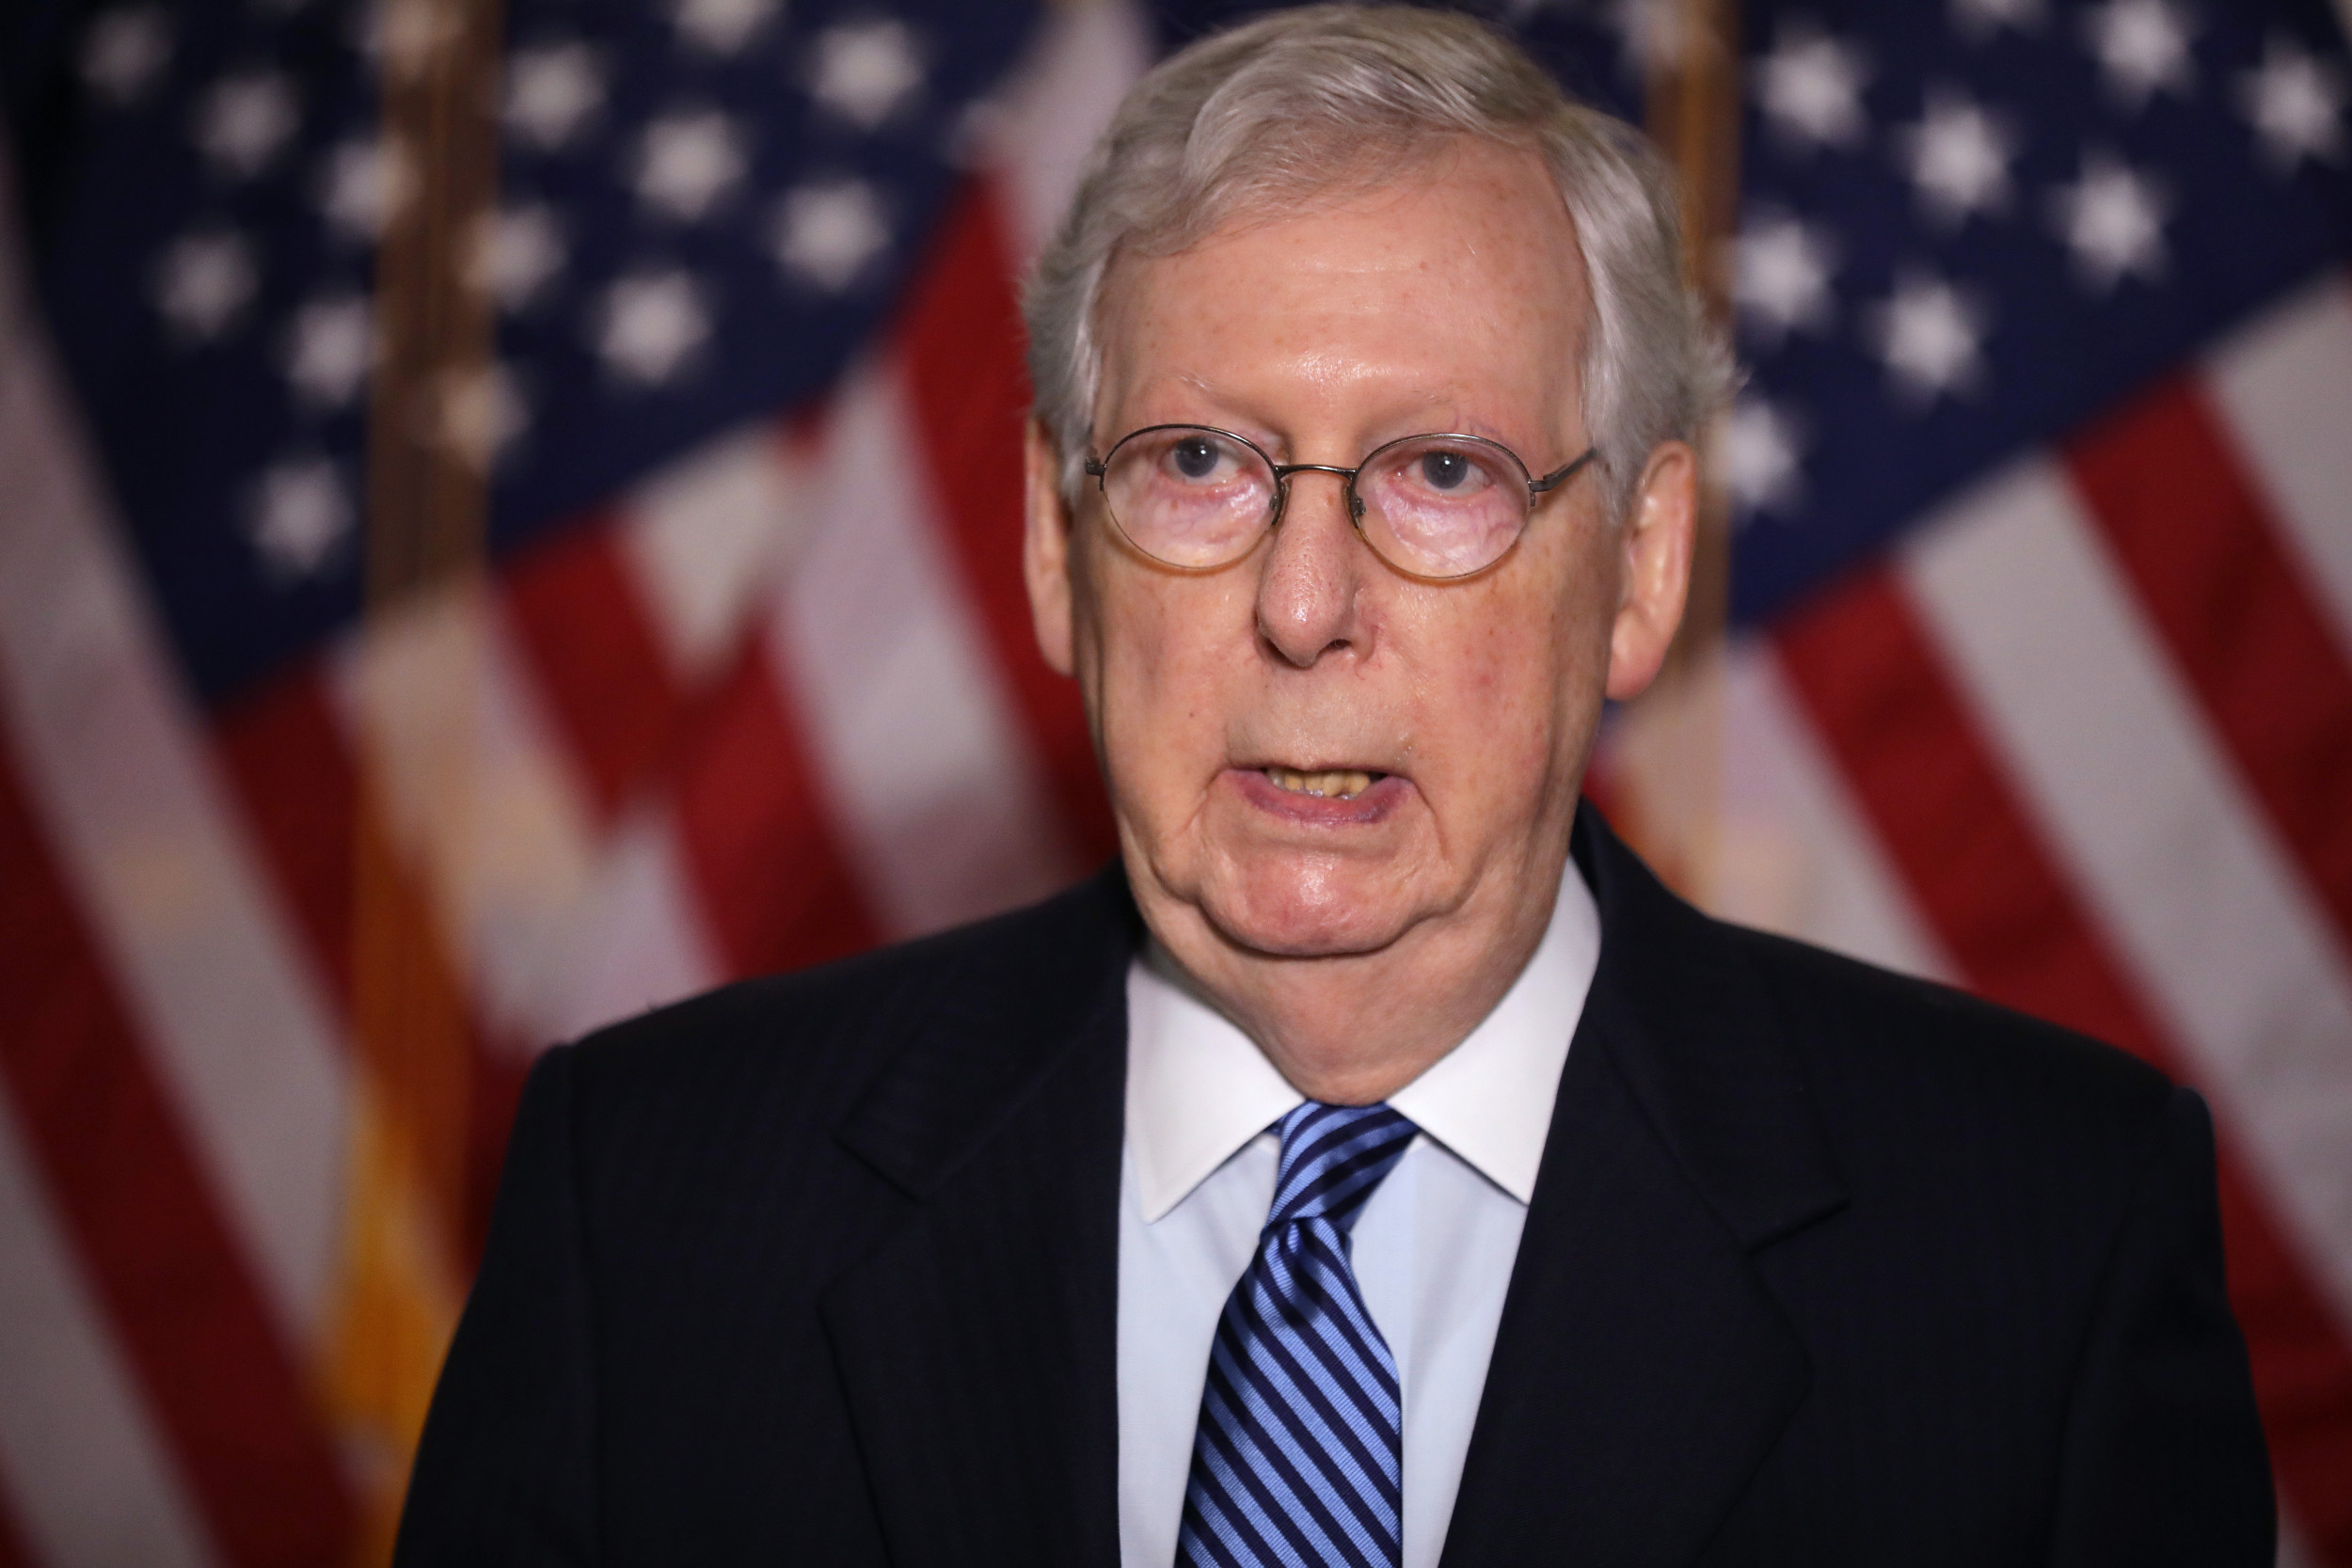 Mitch McConnell news &amp; latest pictures from Newsweek.com